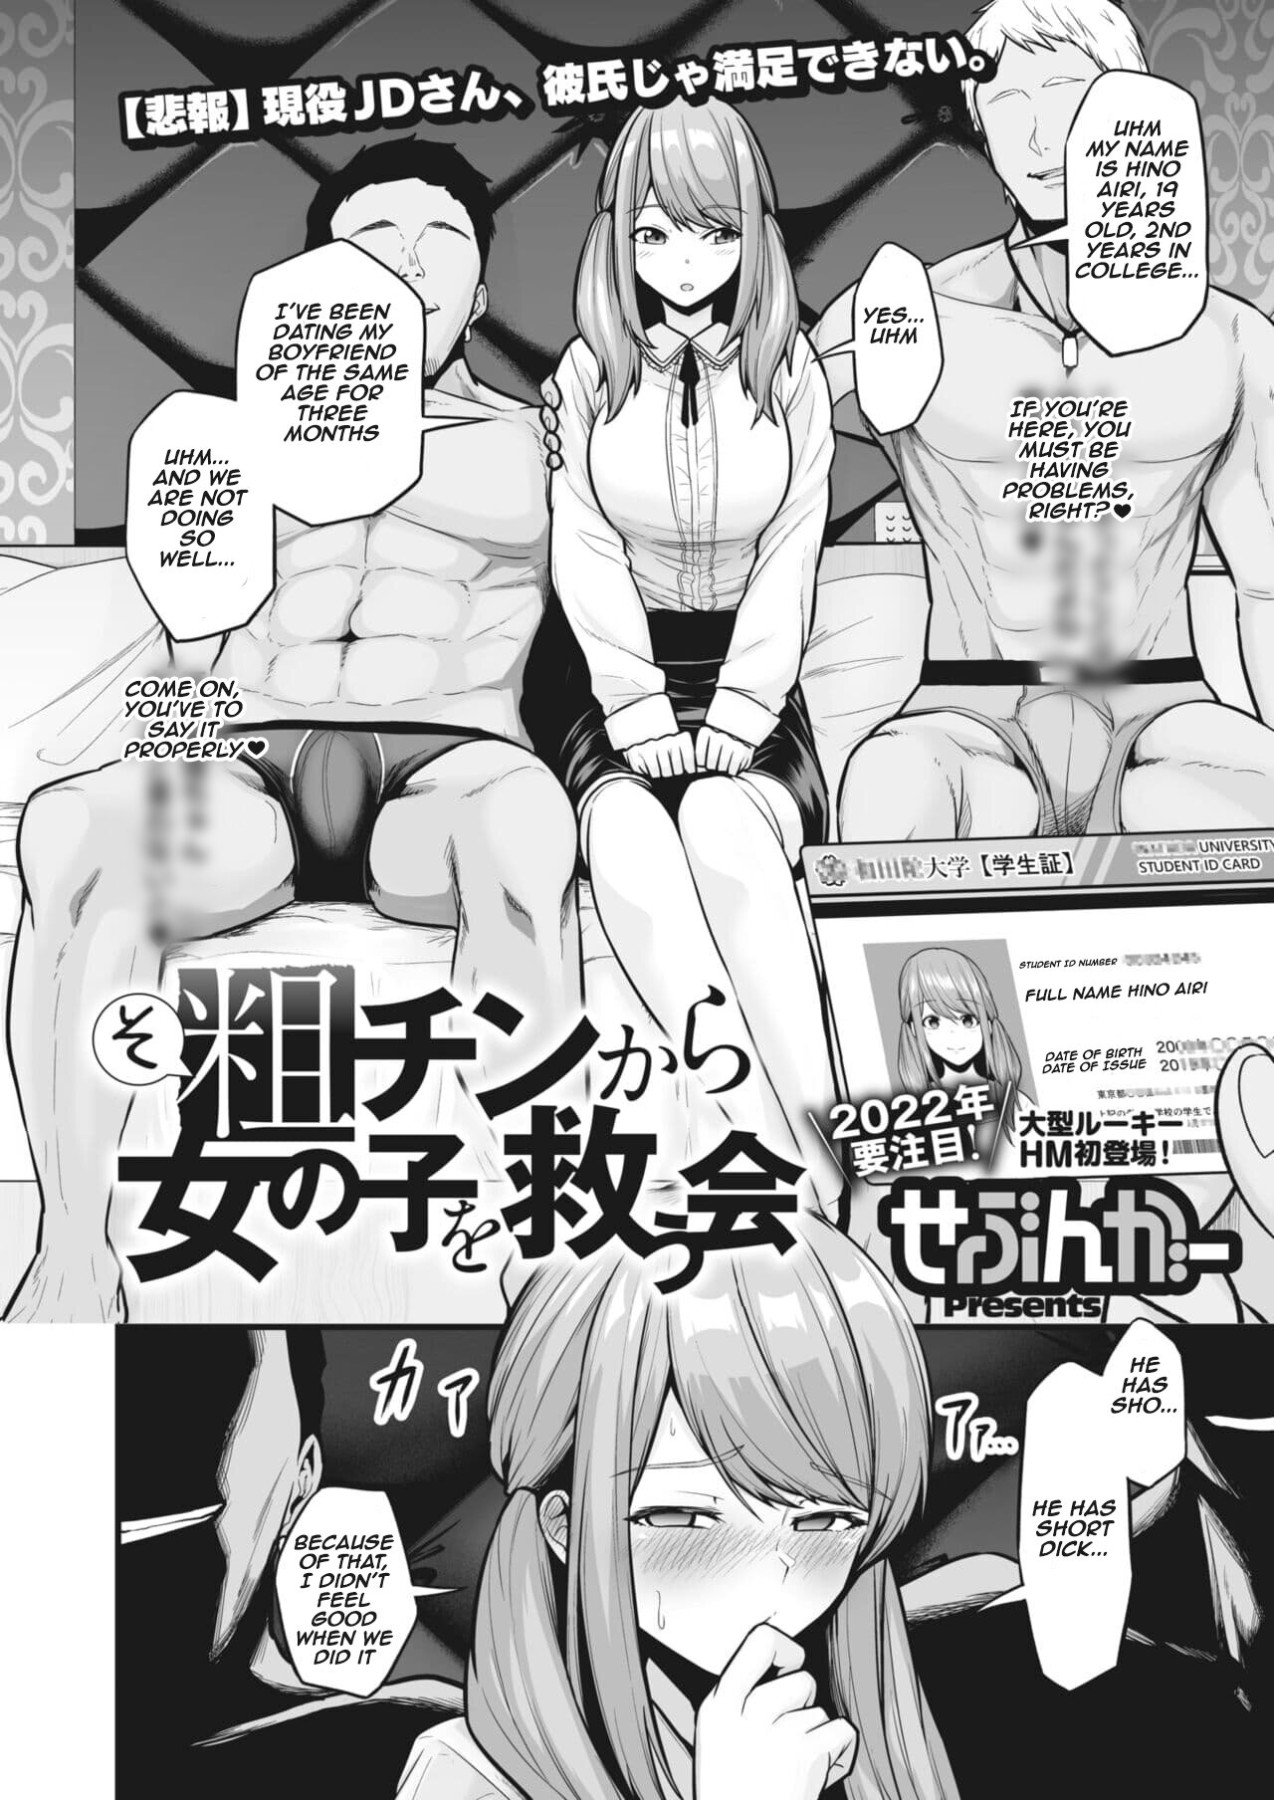 Hentai Manga Comic-Search and Rescue Squad to Save Girls From Short Dicks-Read-2